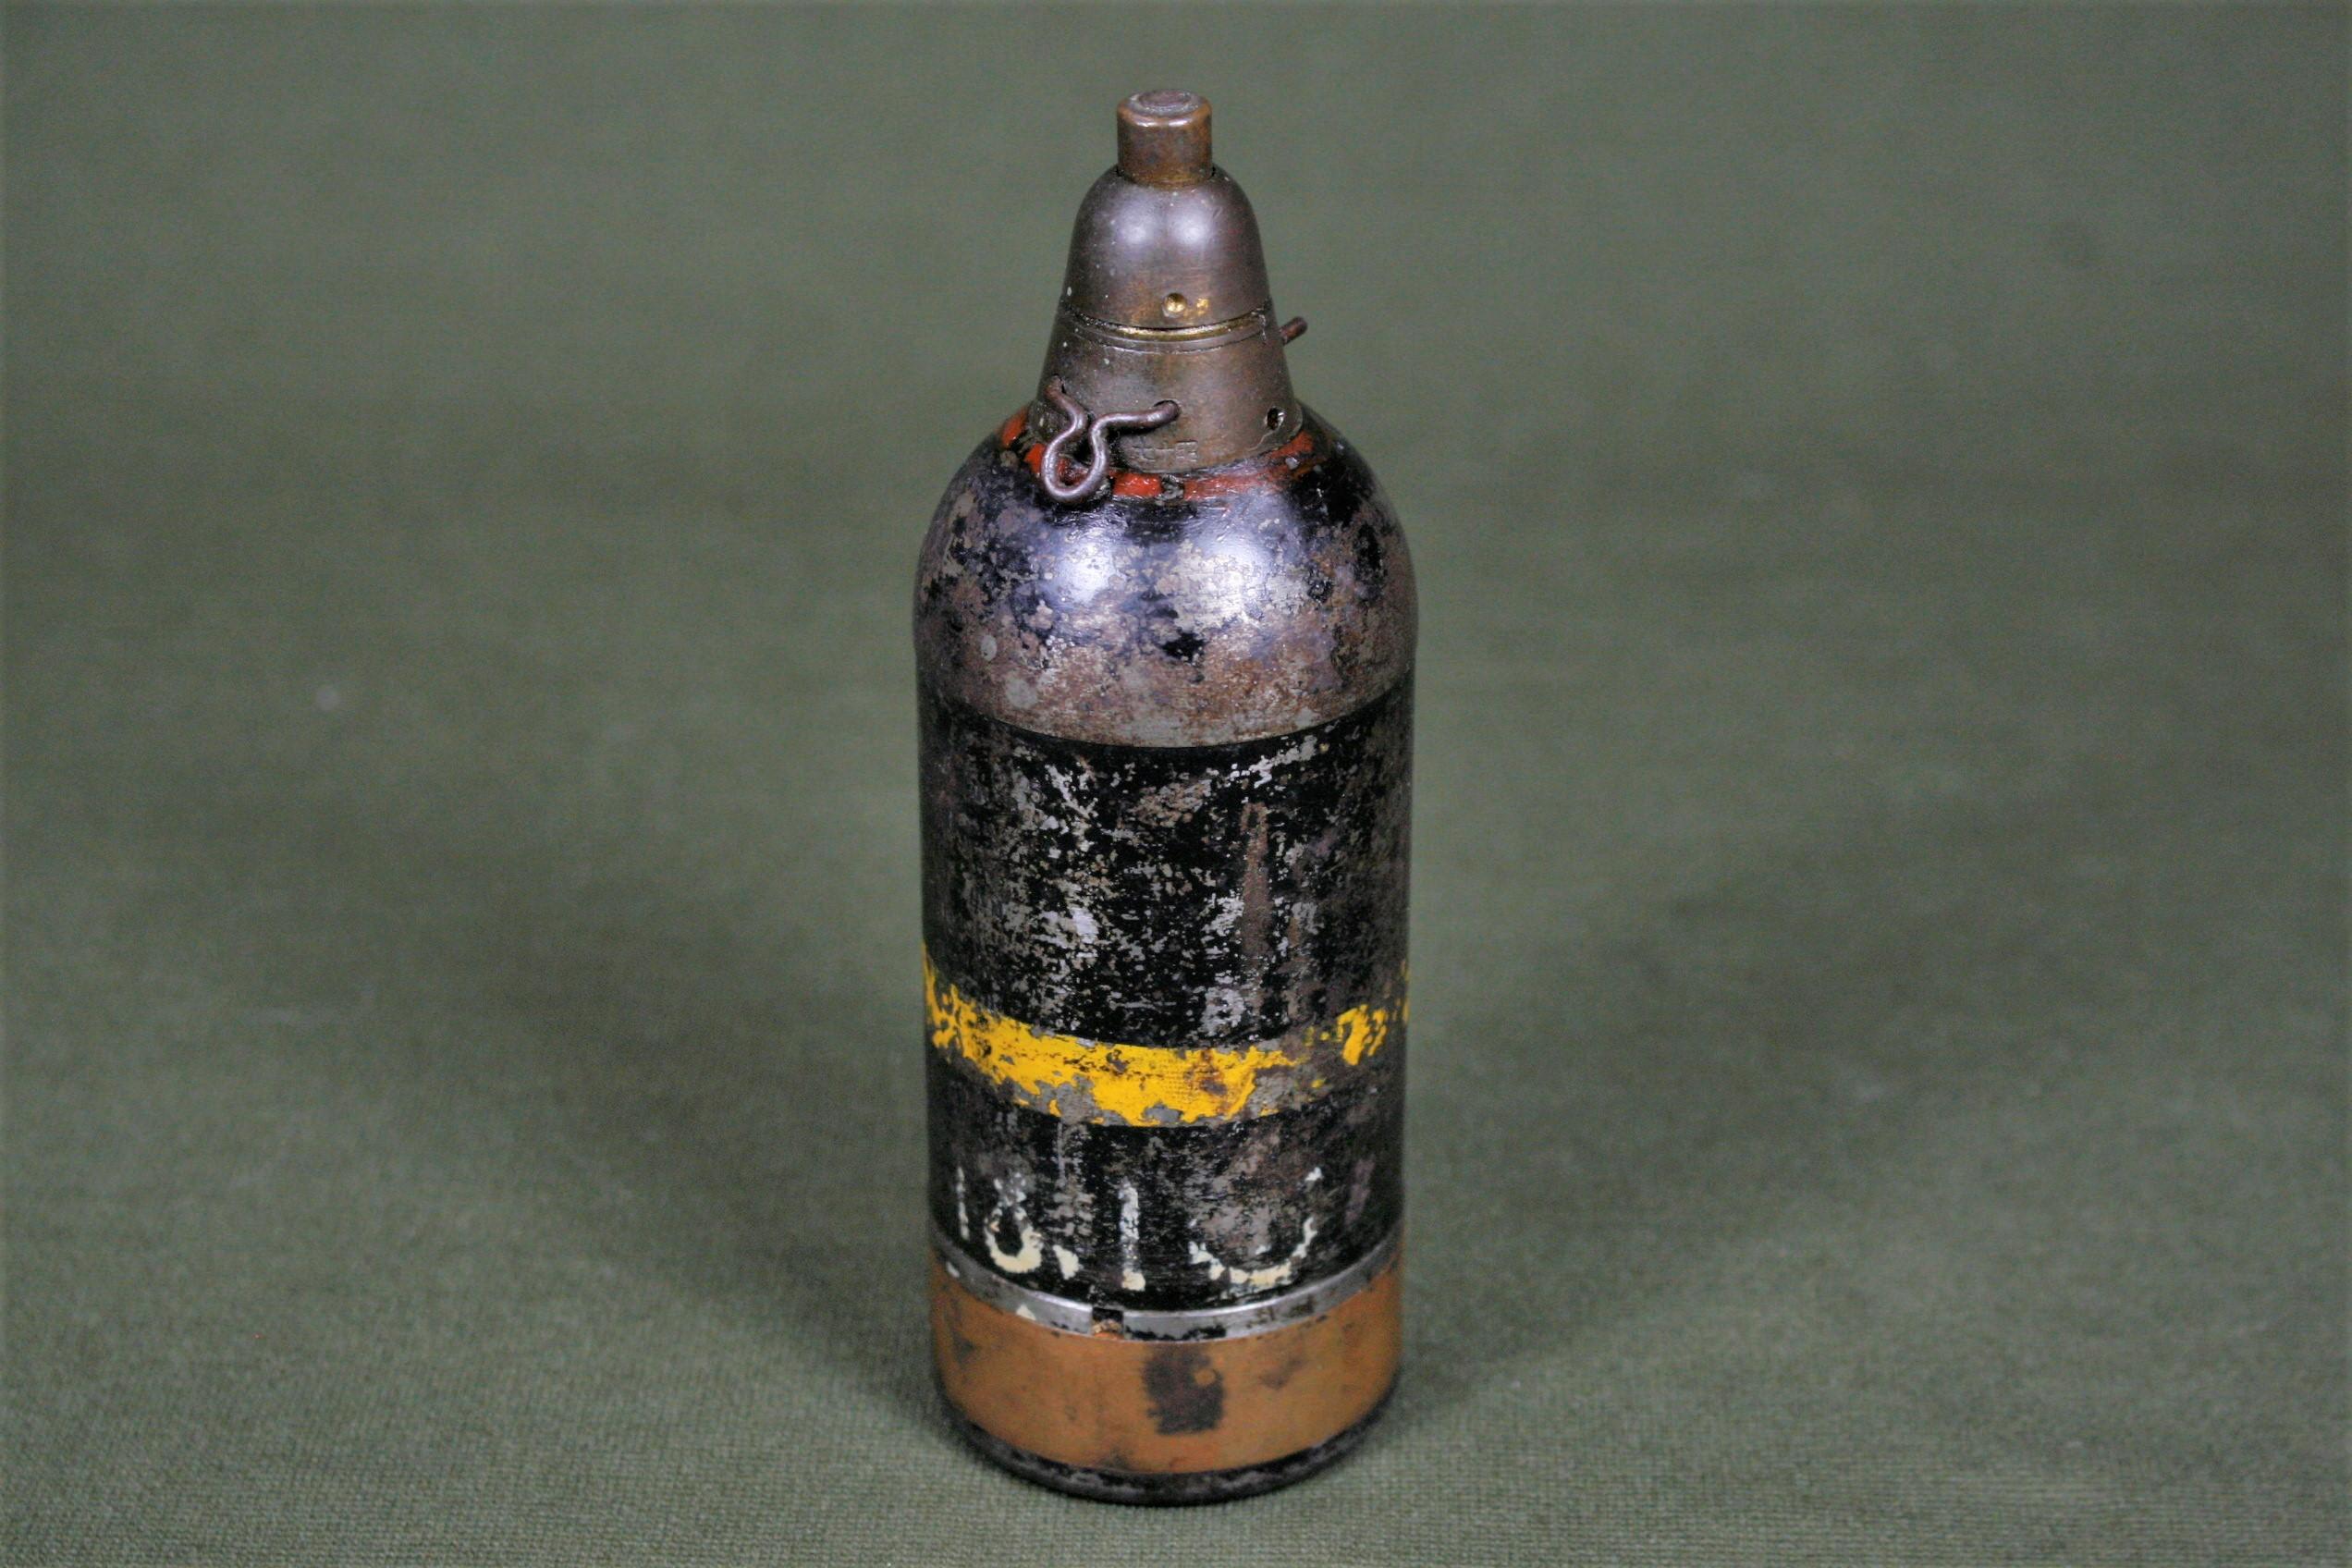 WWII deactivated Japanese knee mortar shell